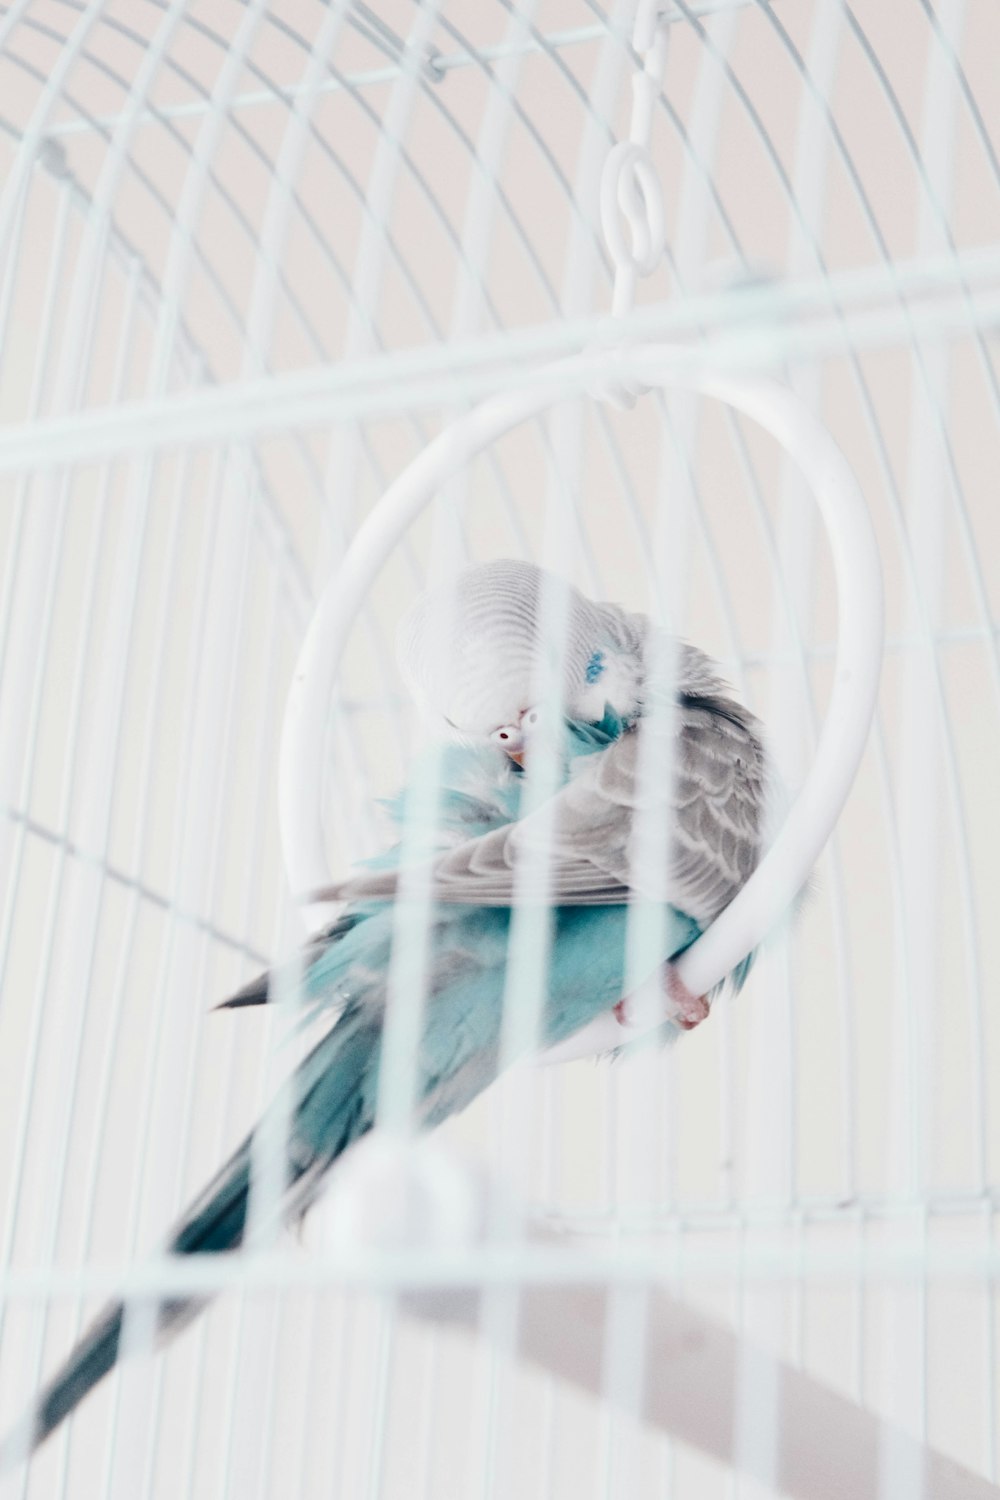 blue and grey bird in white metal cage